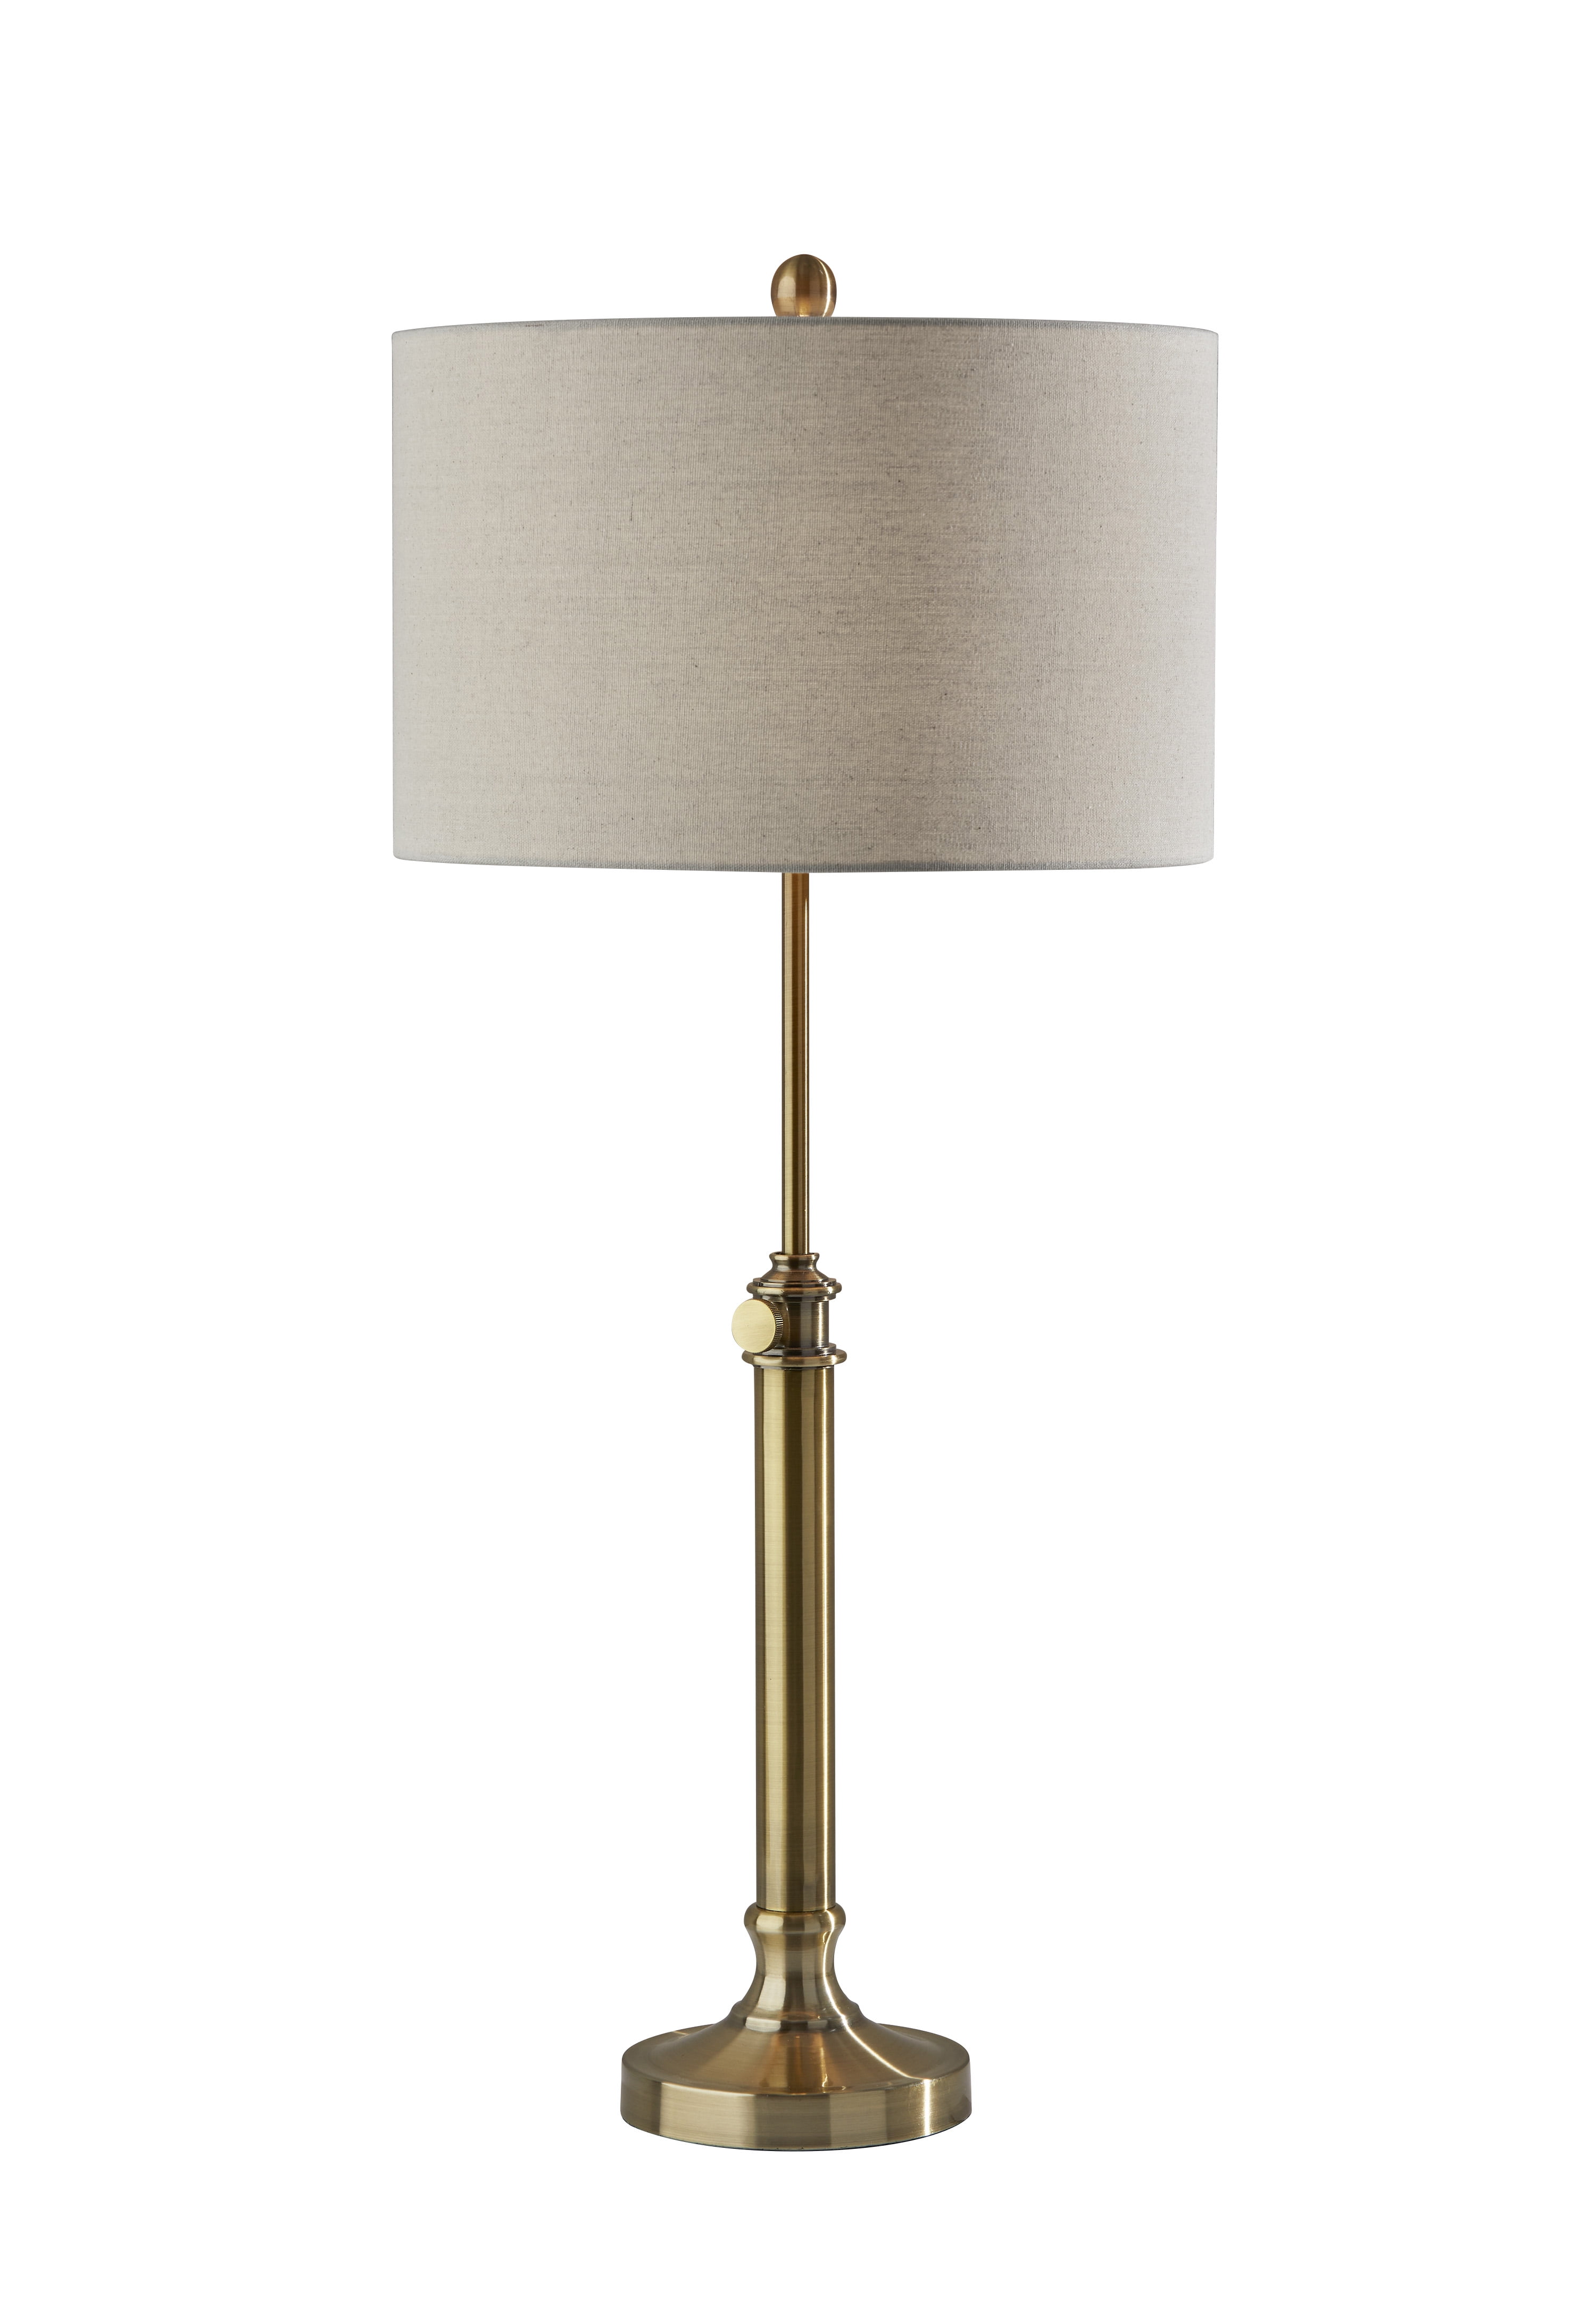 Small Brass Table Lamp with Scrolled Base - The Light House